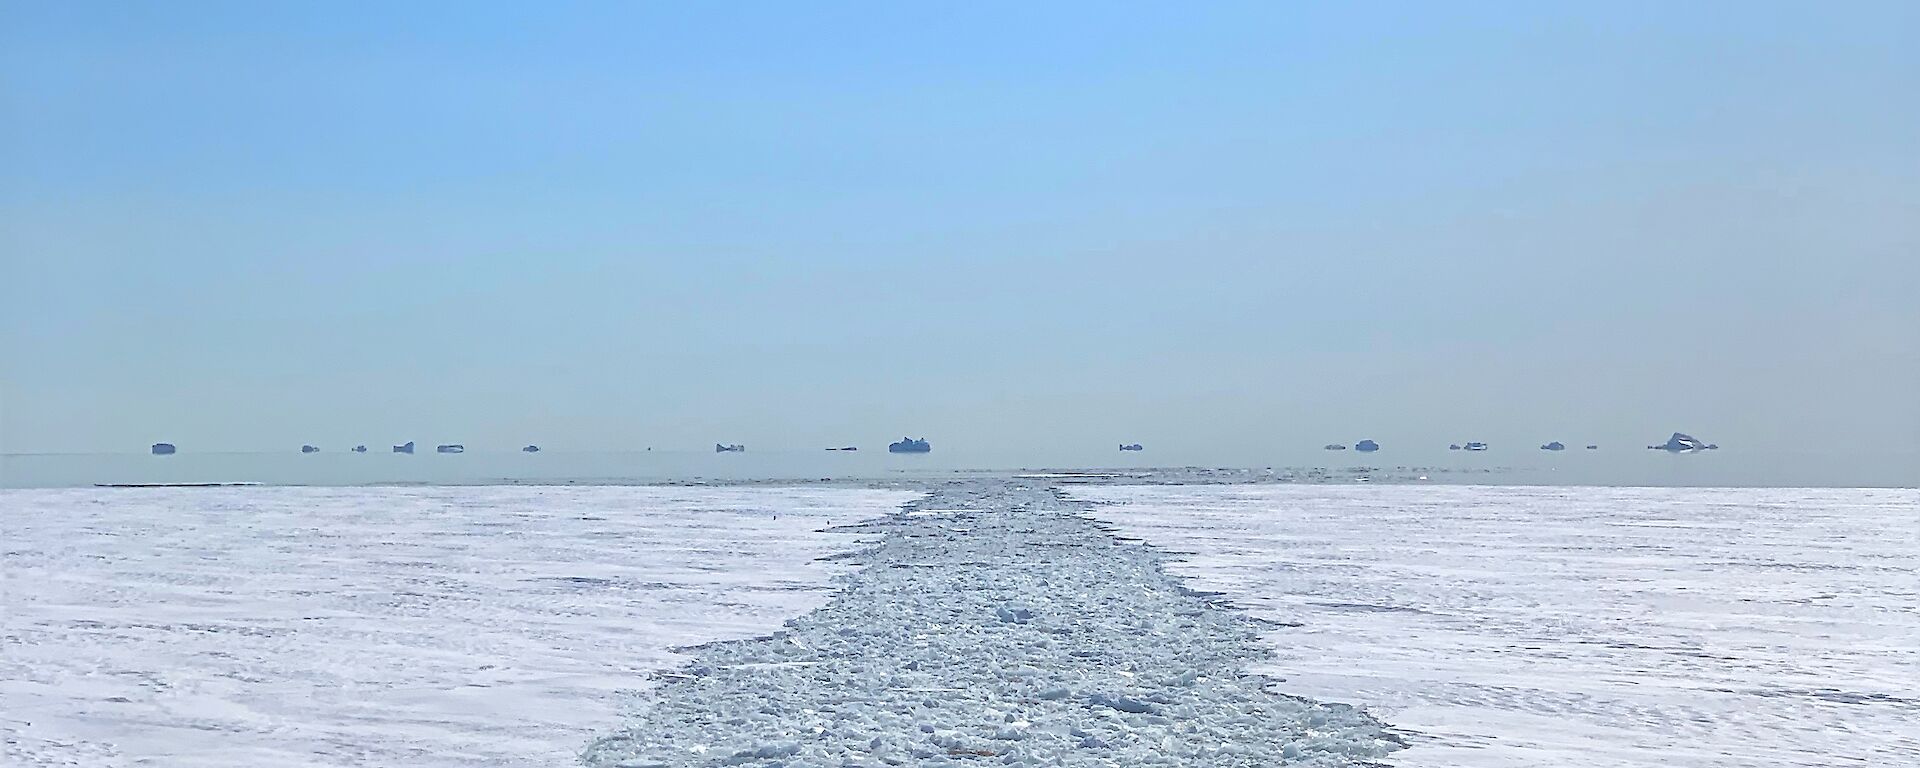 Looking back from the ship at a long trail of broken sea ice